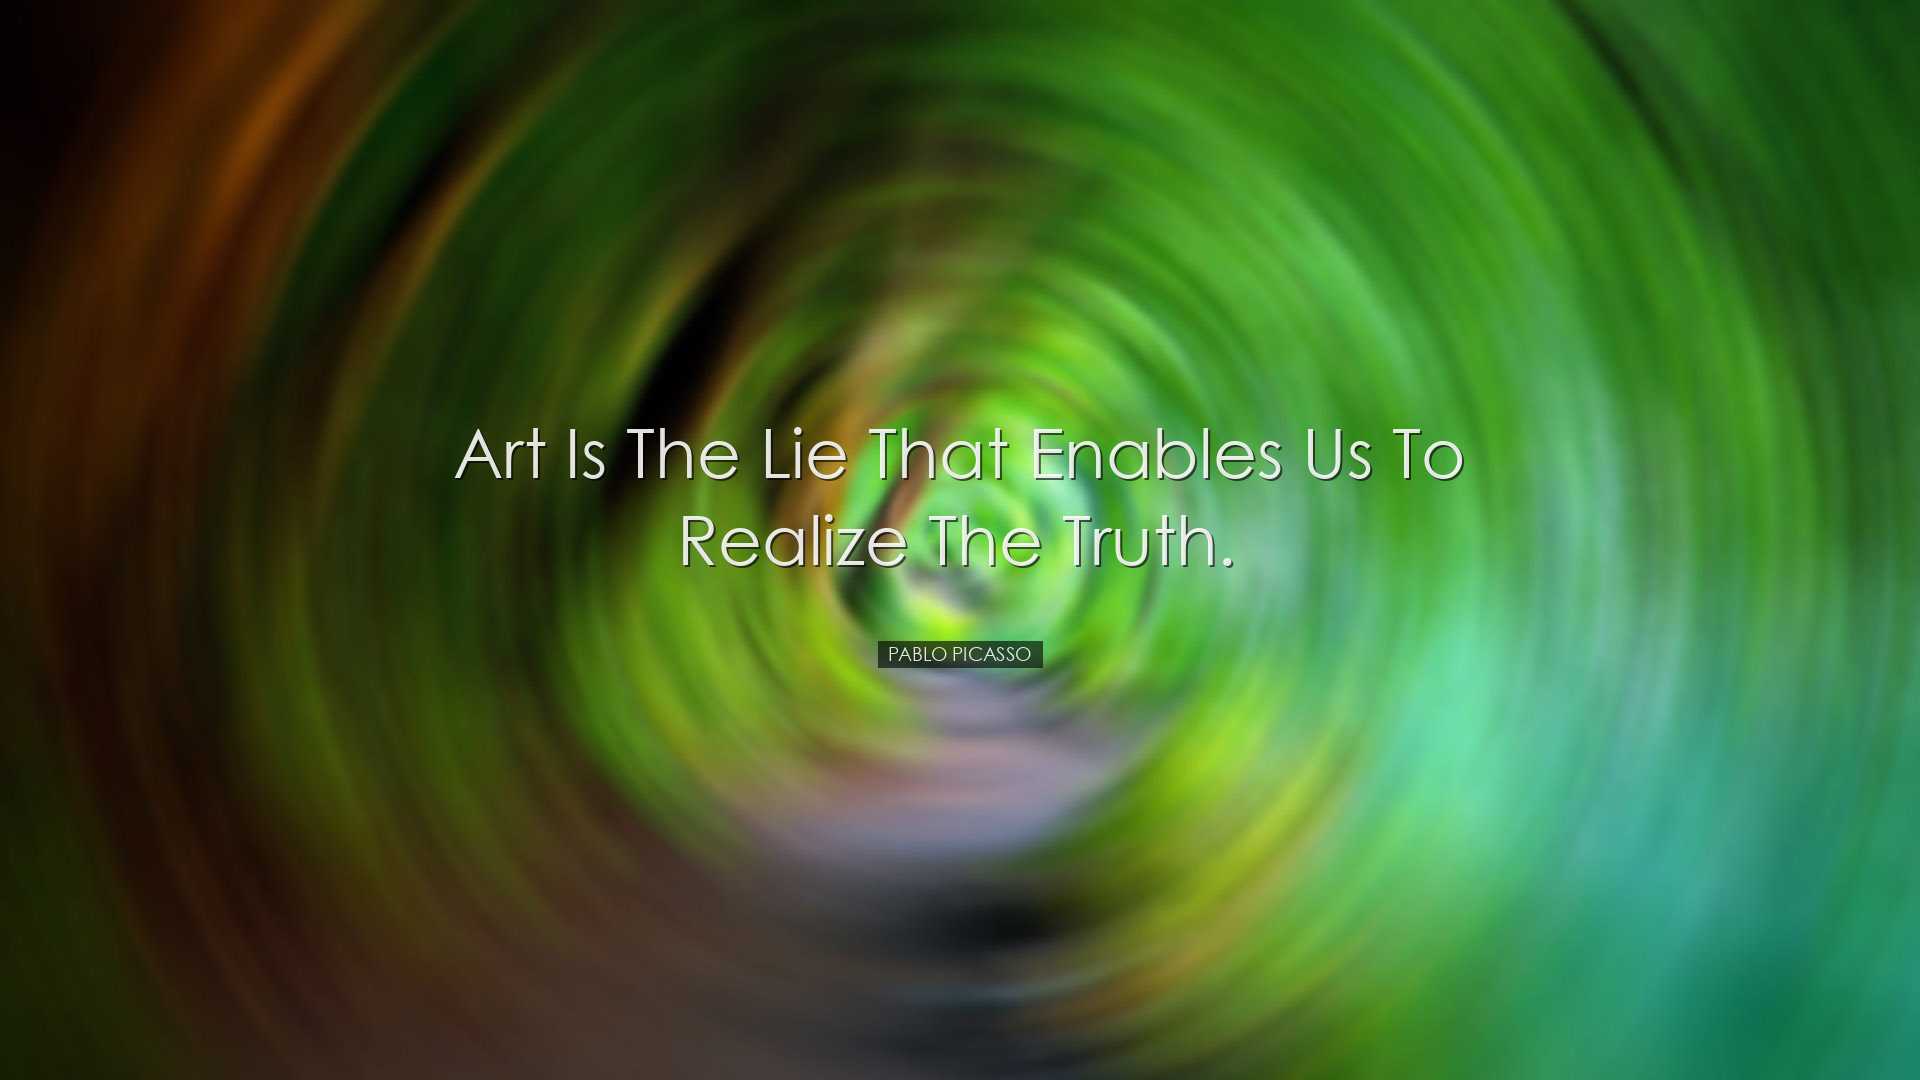 Art is the lie that enables us to realize the truth. - Pablo Picas